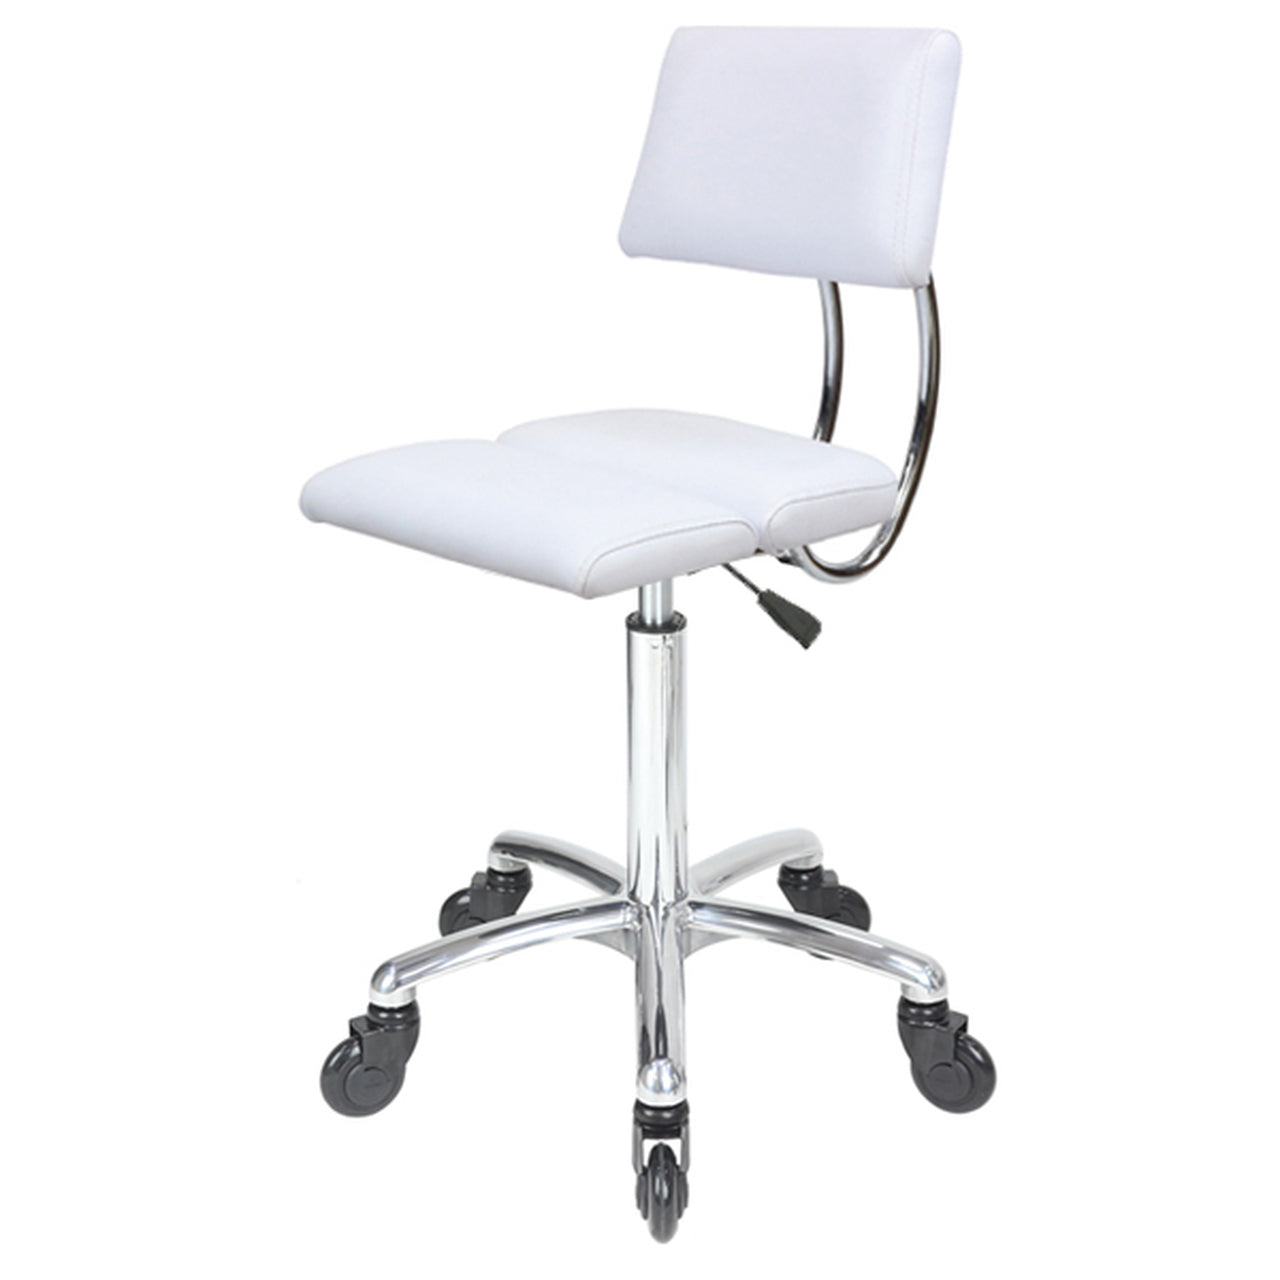 Dove - Chrome Base - (White Upholstery) With
CLICK'NCLEAN Castors